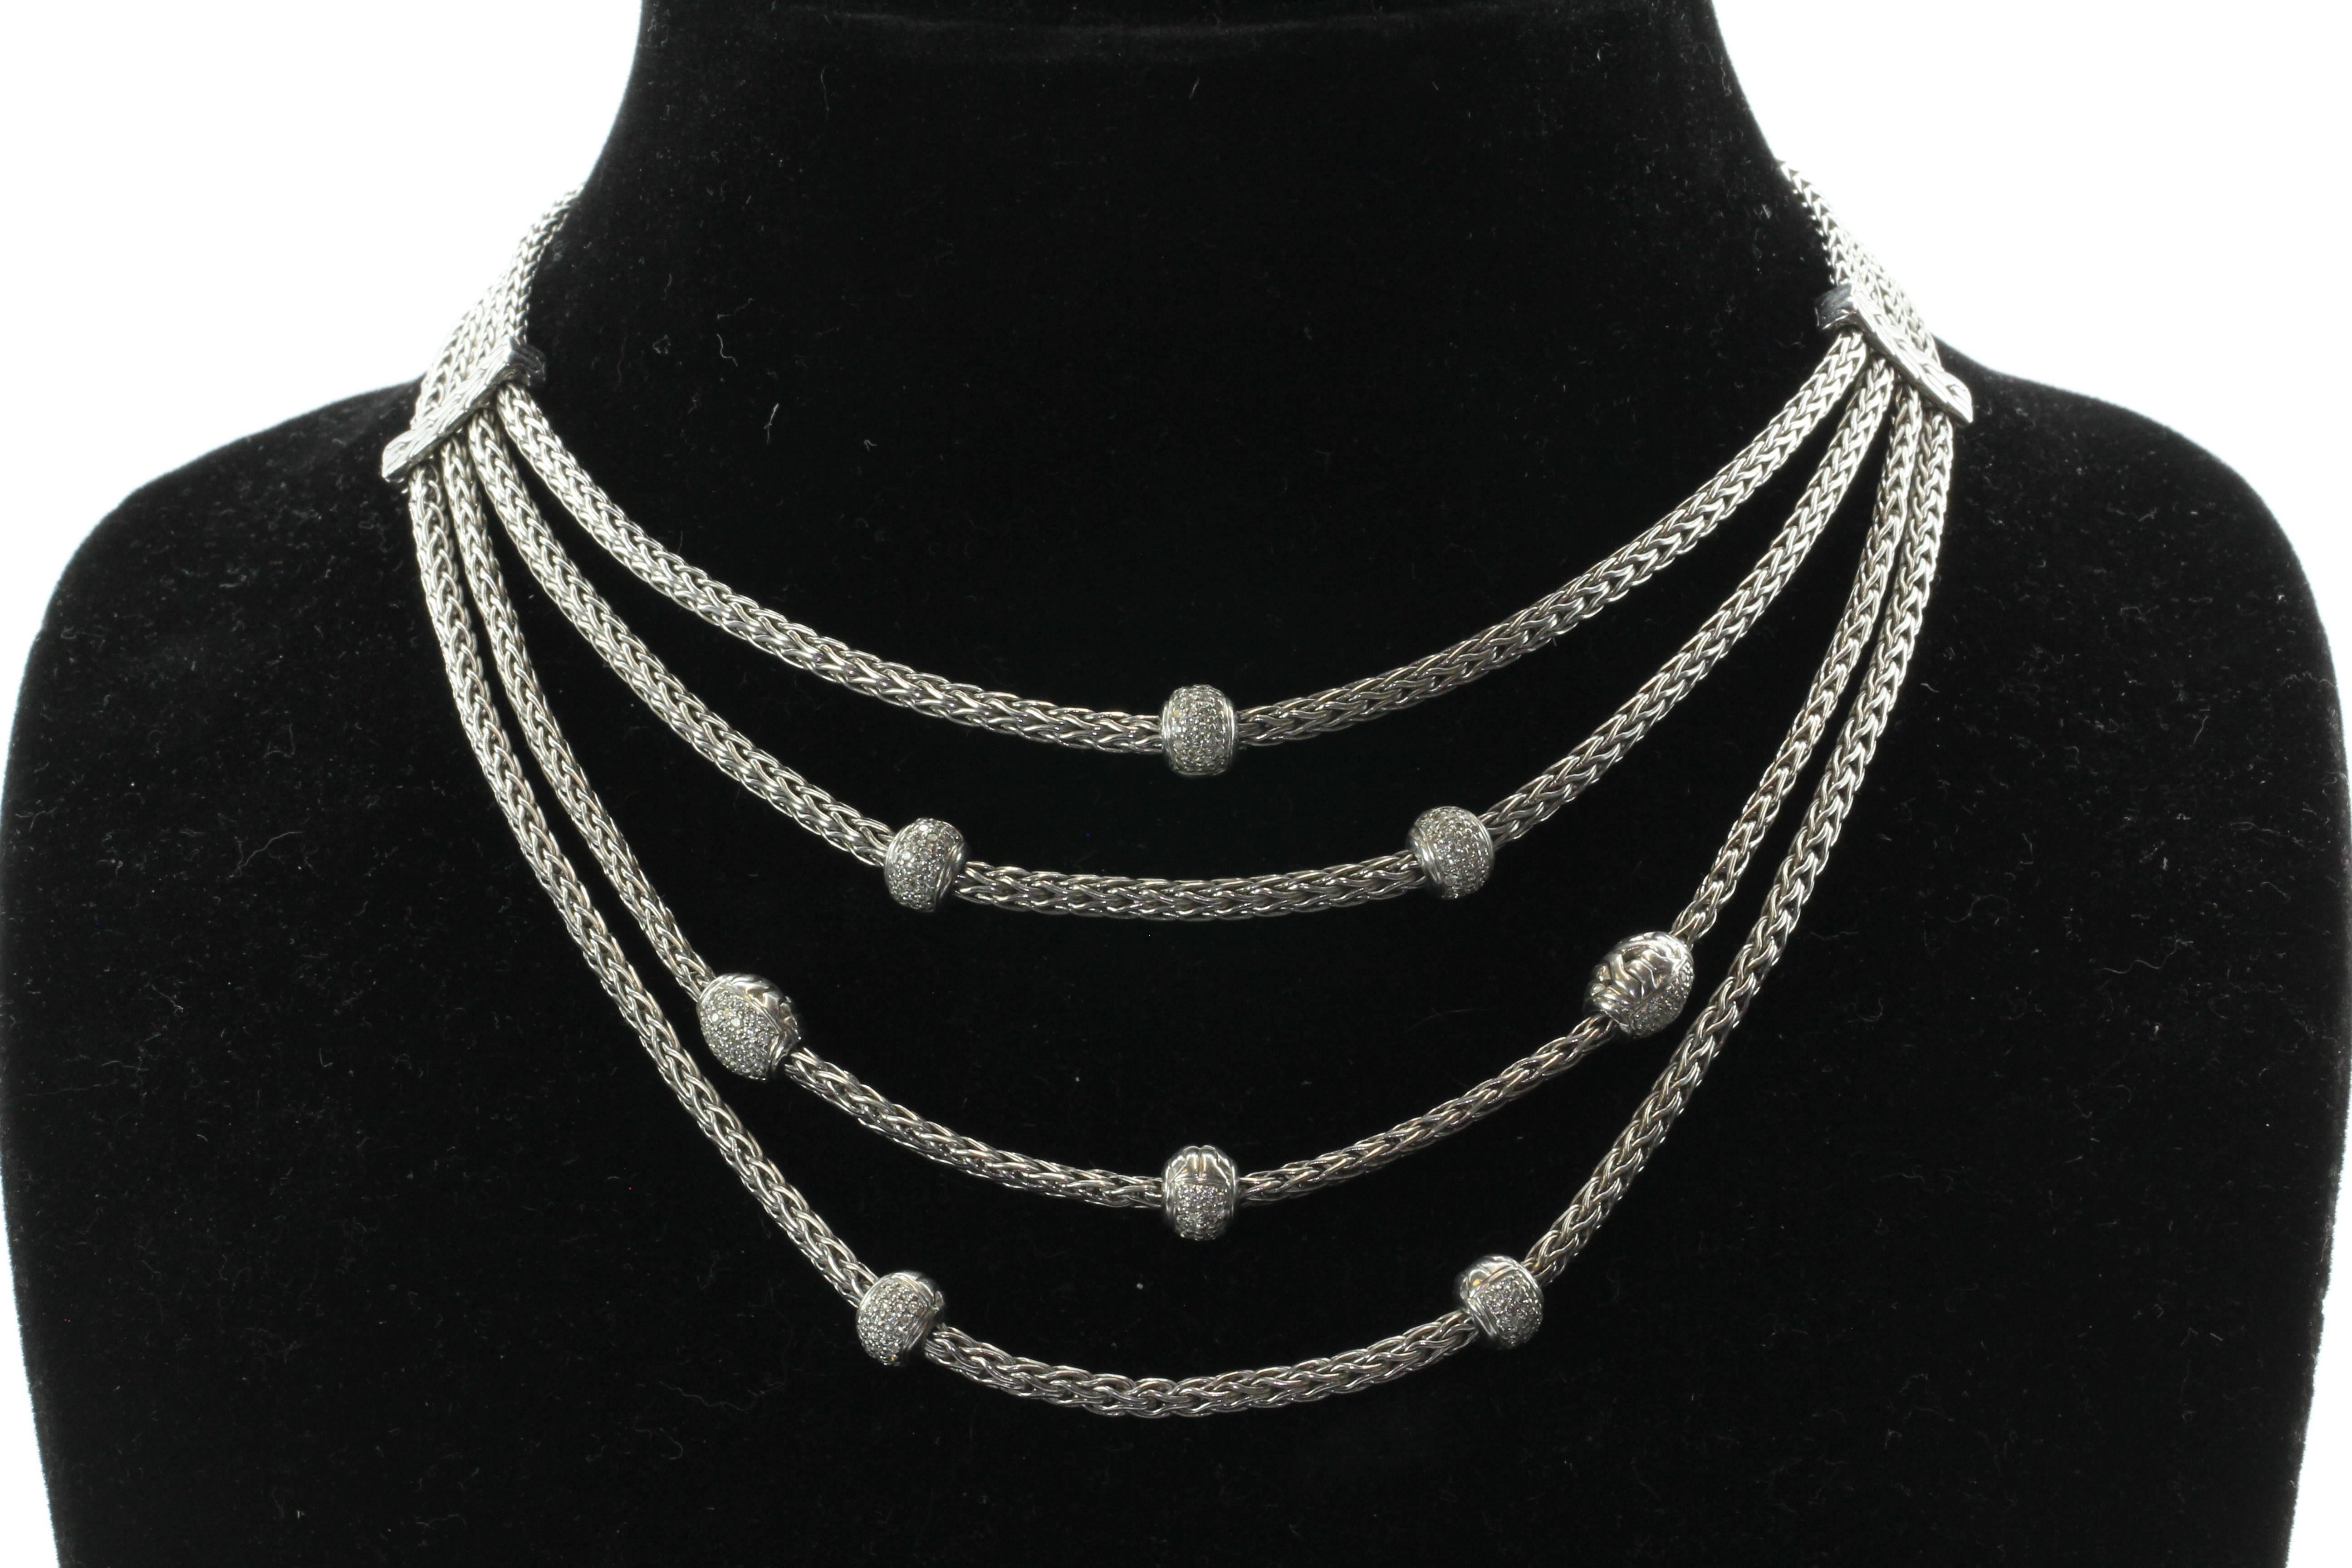 John Hardy Sterling Silver & Diamond 8 Station Bali Classic 4 Row Necklace. The necklace is in excellent used estate condition and ready to wear. The piece was purchased in the John Hardy Bali Showroom where each piece is artisan crafted. The piece